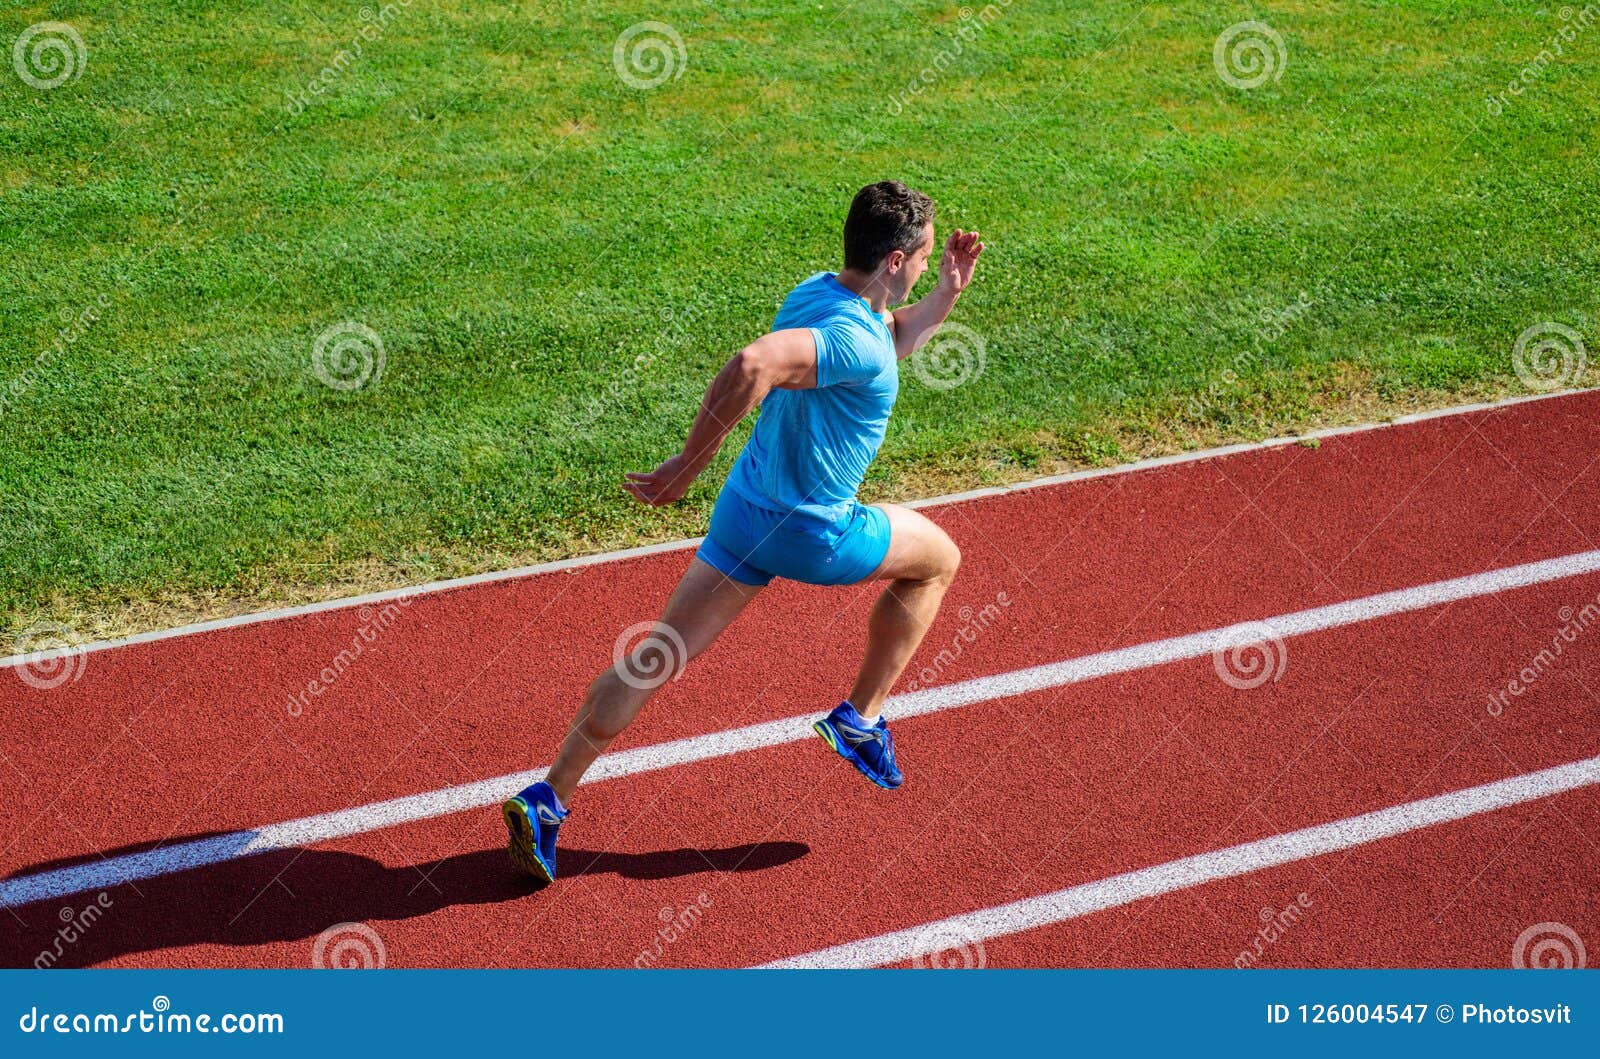 stimulere tidligere videnskabelig Simple Ways To Improve Running Speed and Endurance. Athlete Runner Sporty  Shape in Motion. Man Athlete Run To Achieve Stock Image - Image of advice,  improve: 126004547